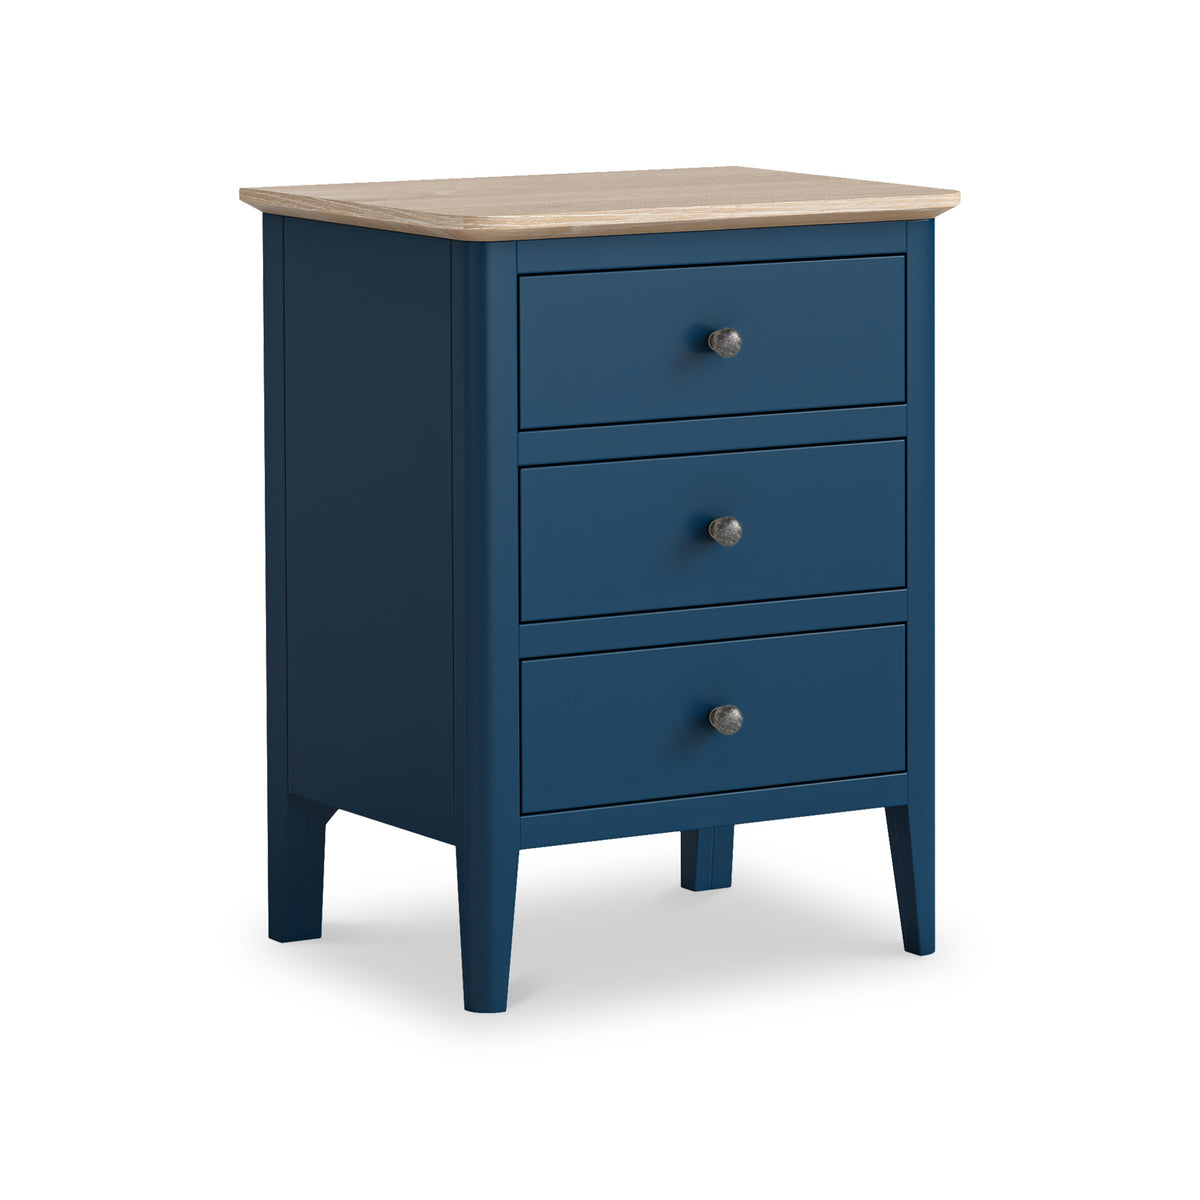 Penrose Navy Blue Bedside Table with metal handles from Roseland Furniture